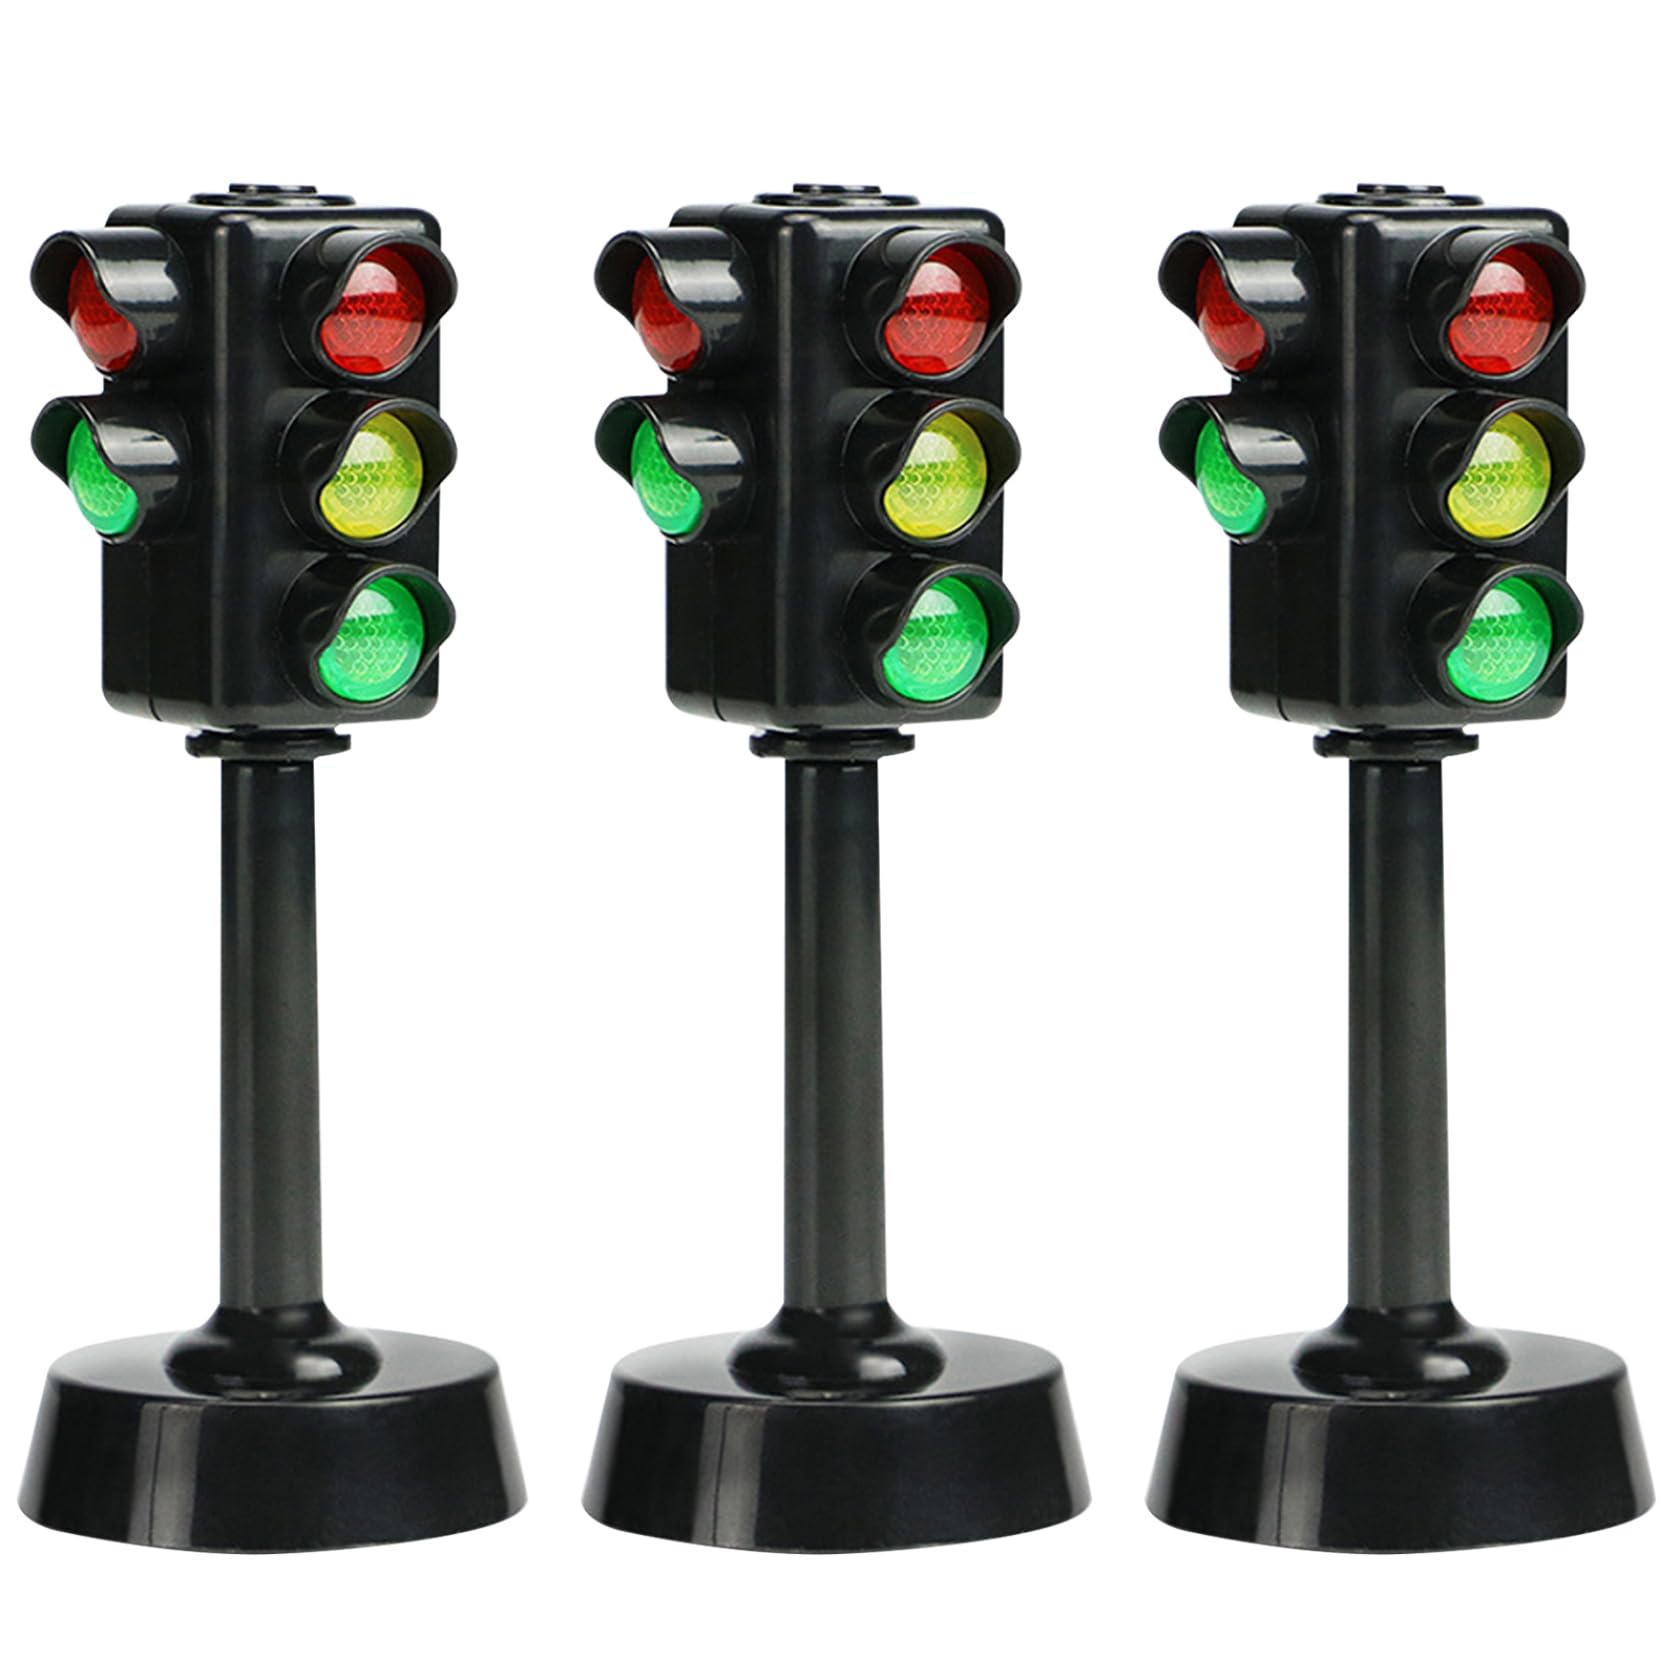 OnIUeZky 3PCS Traffic Lights for Kids, 4.7 inch Mini Toy Road Signs, Traffic Light Toys for Kids LED Toy Traffic Lights with Horn Sound, Early Education Stop Signs Traffic